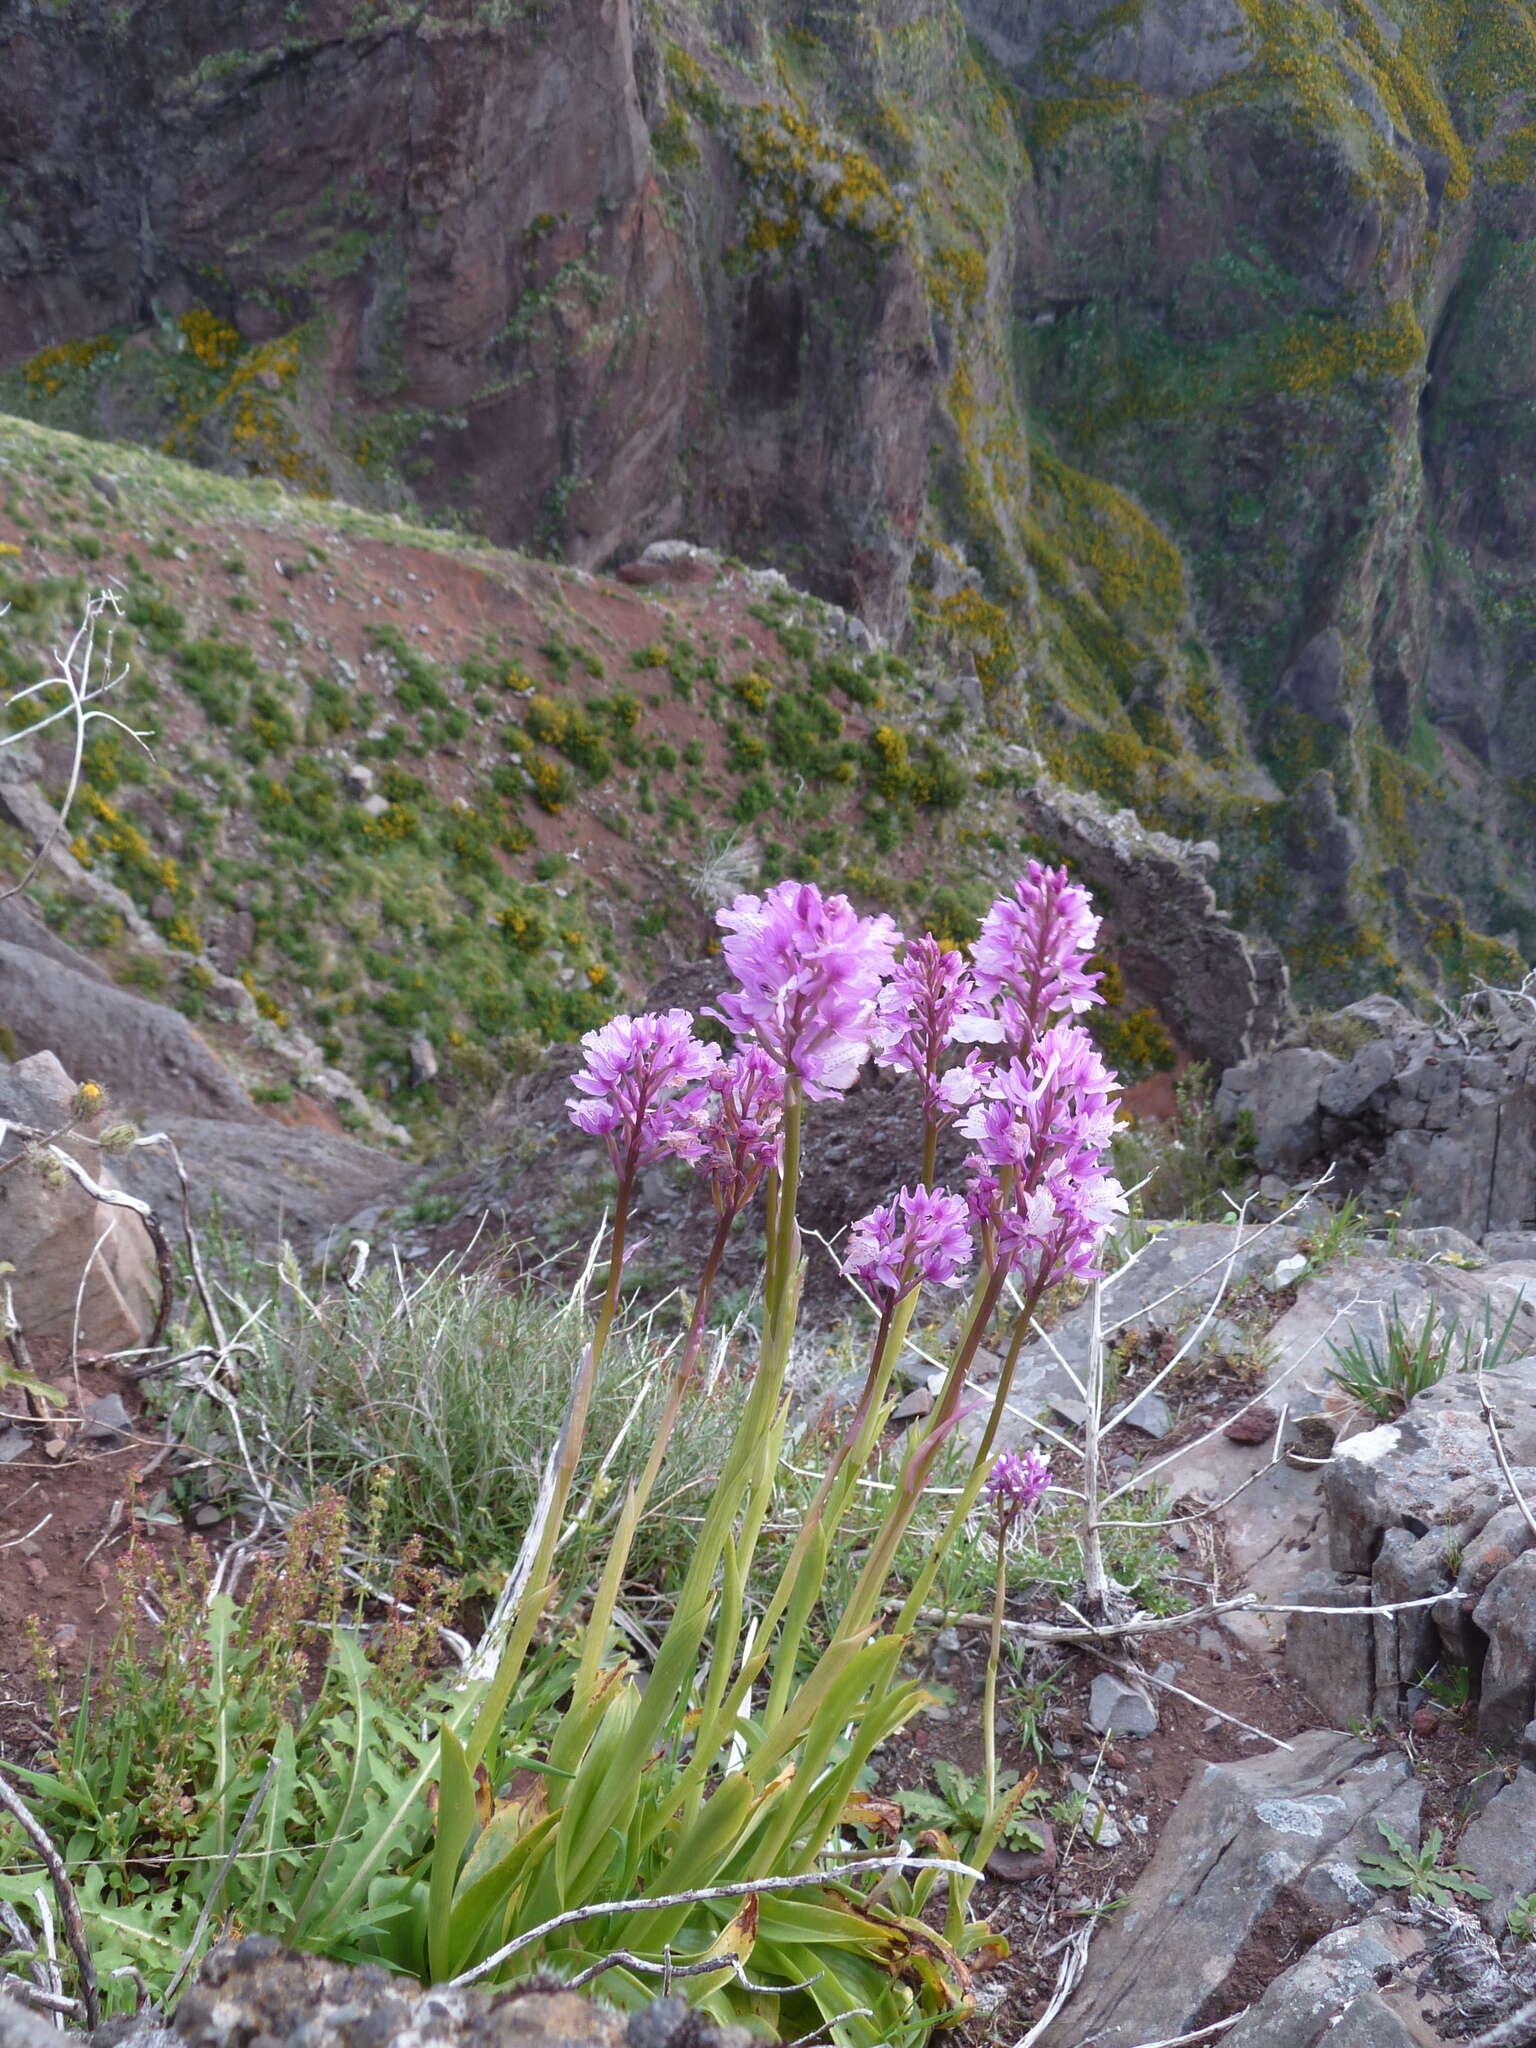 Image of Madeiran Orchid